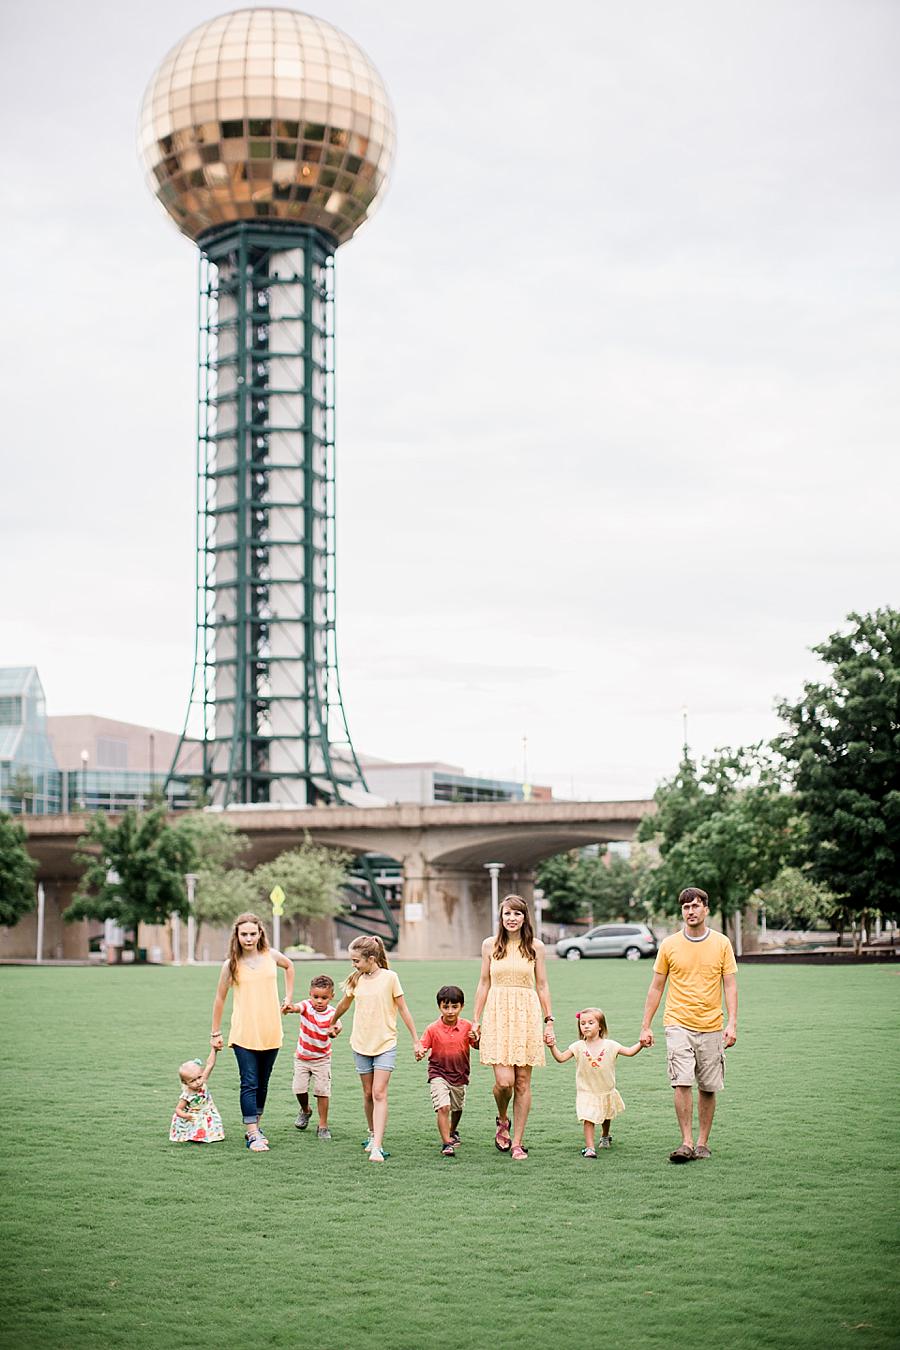 The Sunsphere at this World's Fair Park session by Knoxville Wedding Photographer, Amanda May Photos.